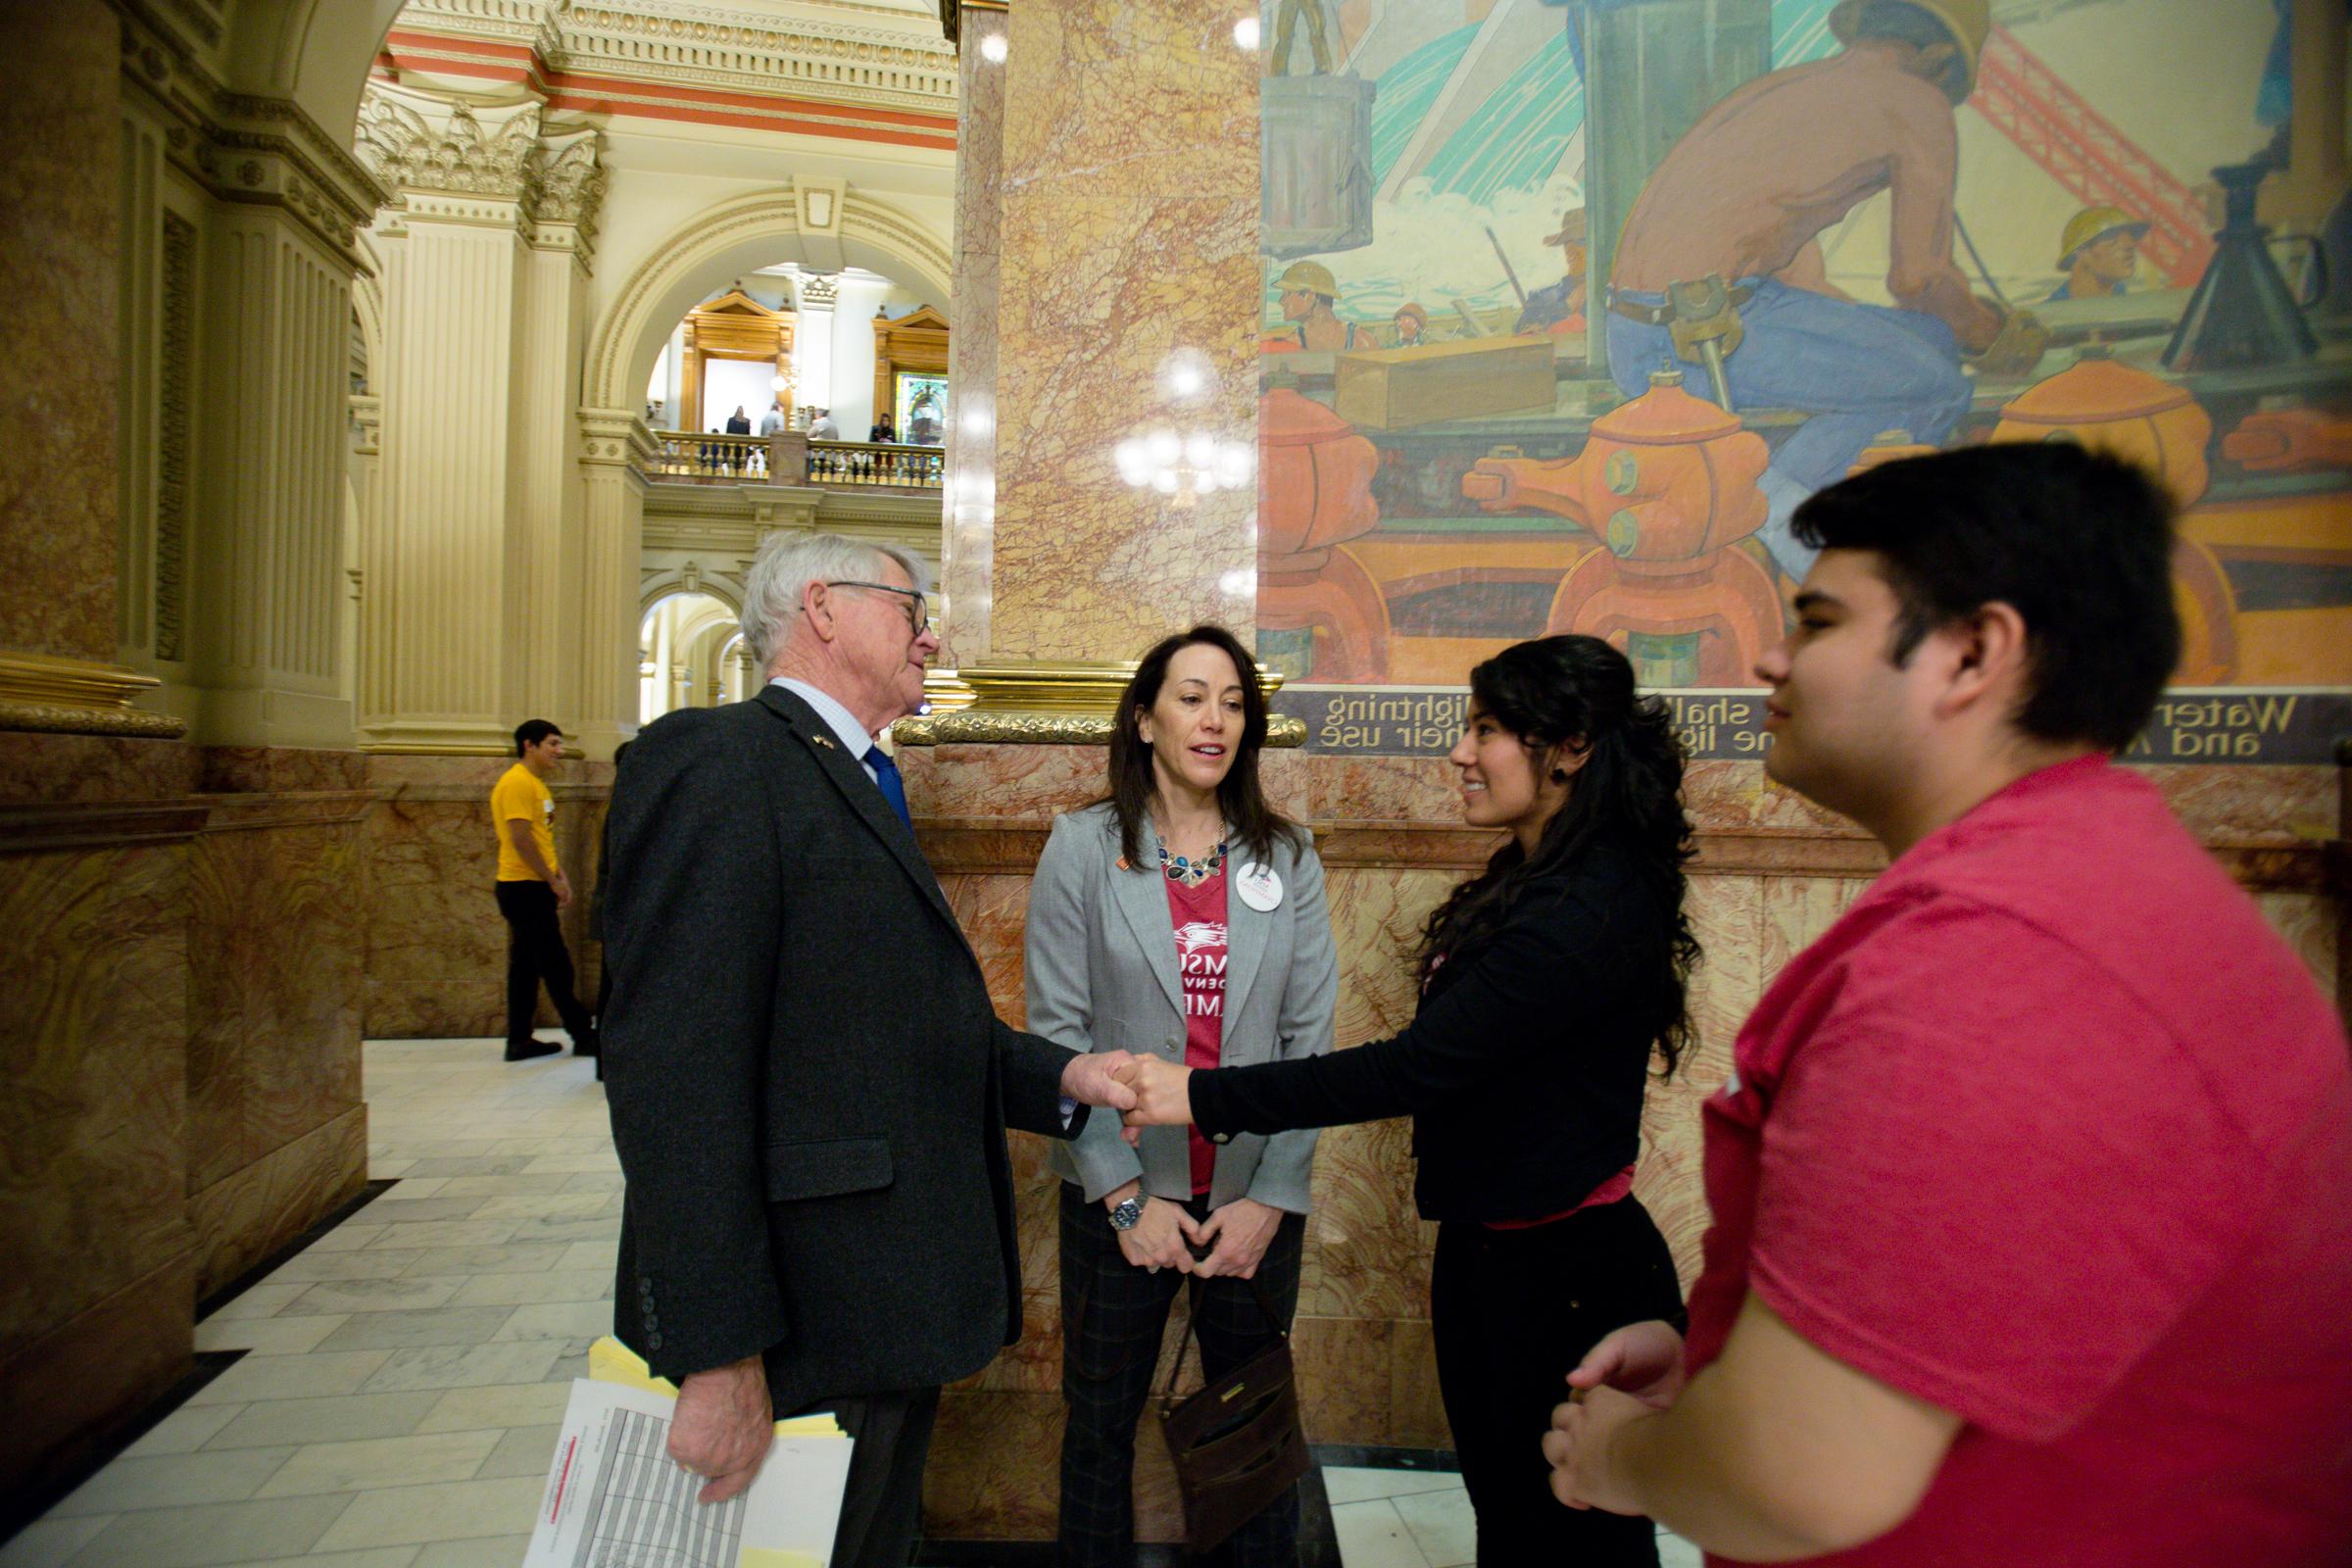 Female student shaking hands with a politician inside the state capitol.